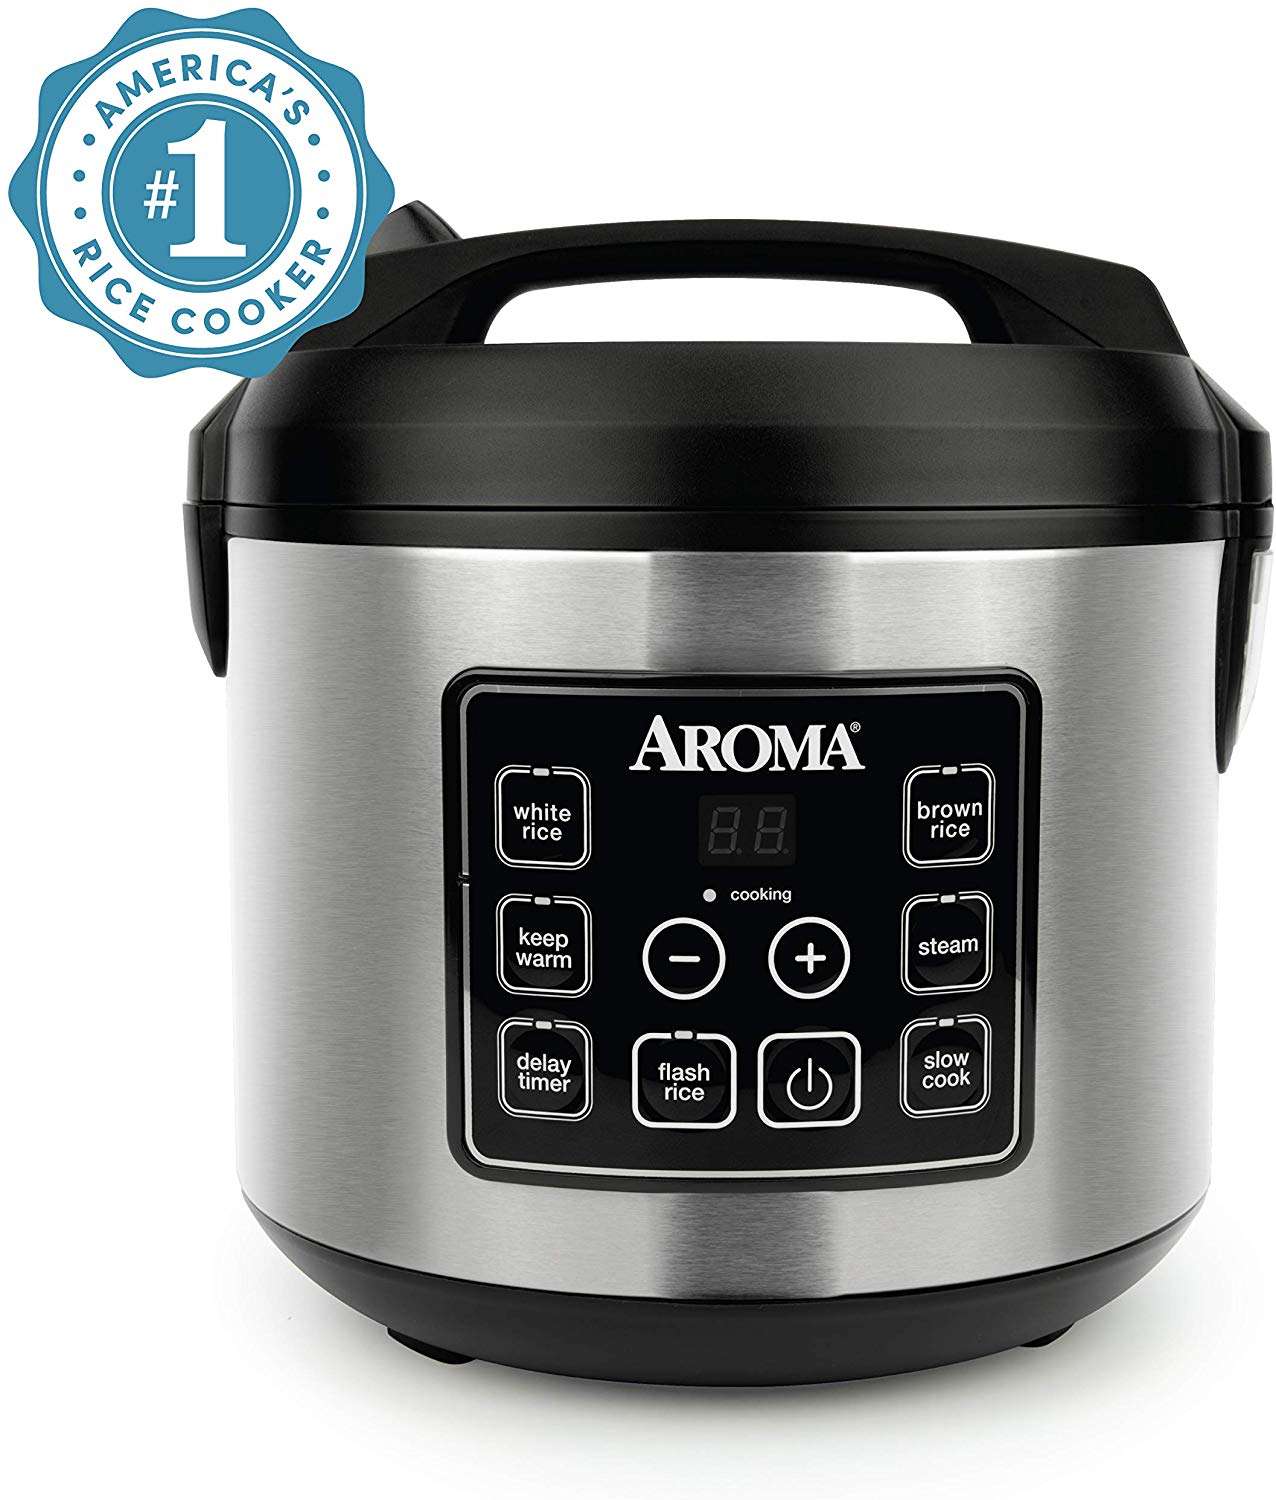 Top 5 Best Rice Cooker with Reviews, Pros and Cons